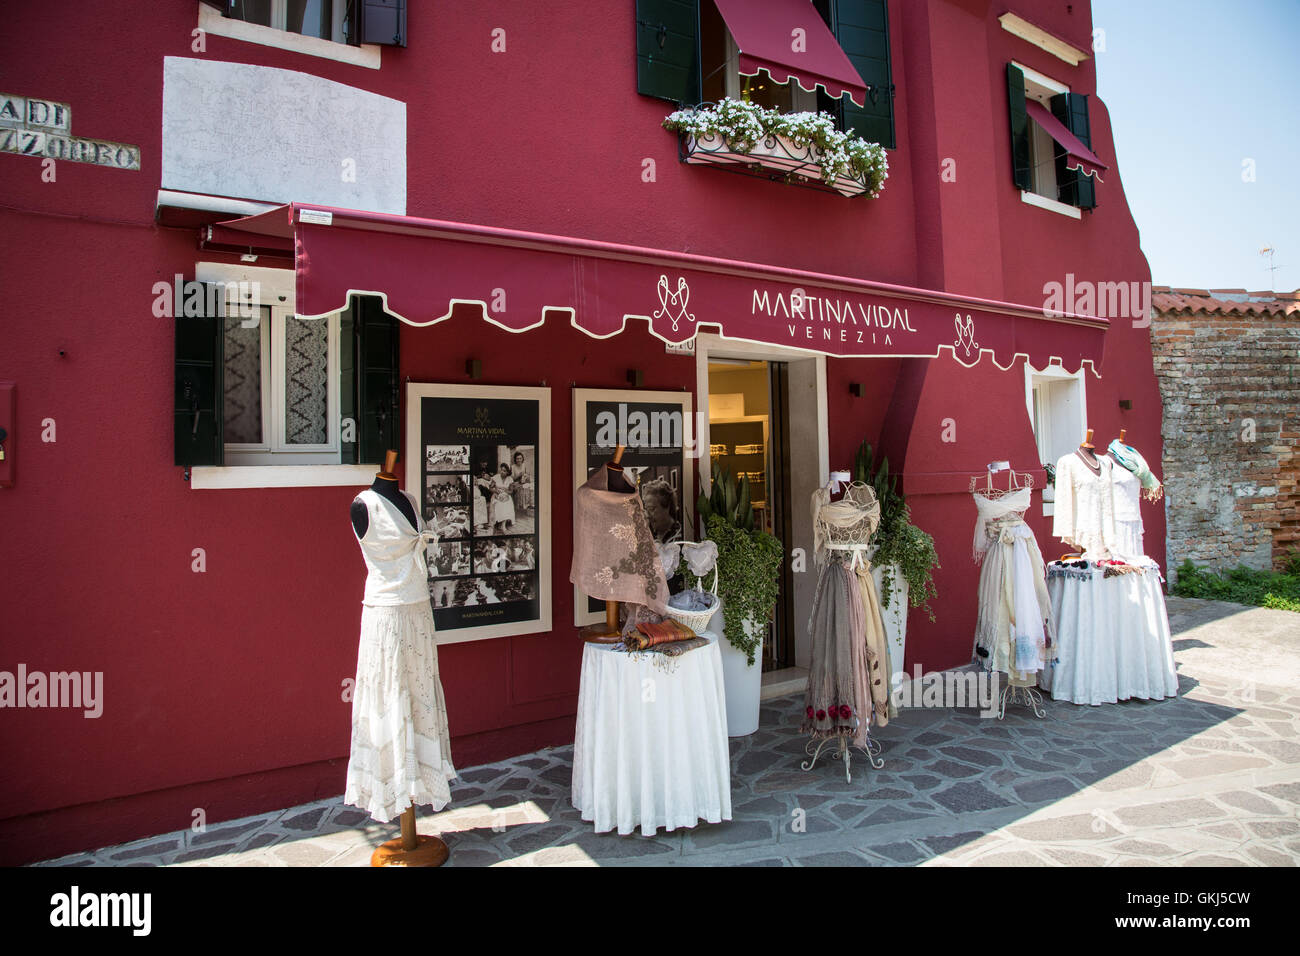 A Wedding dress shop on the Island of Burano specialising in lace wedding dresses Stock Photo